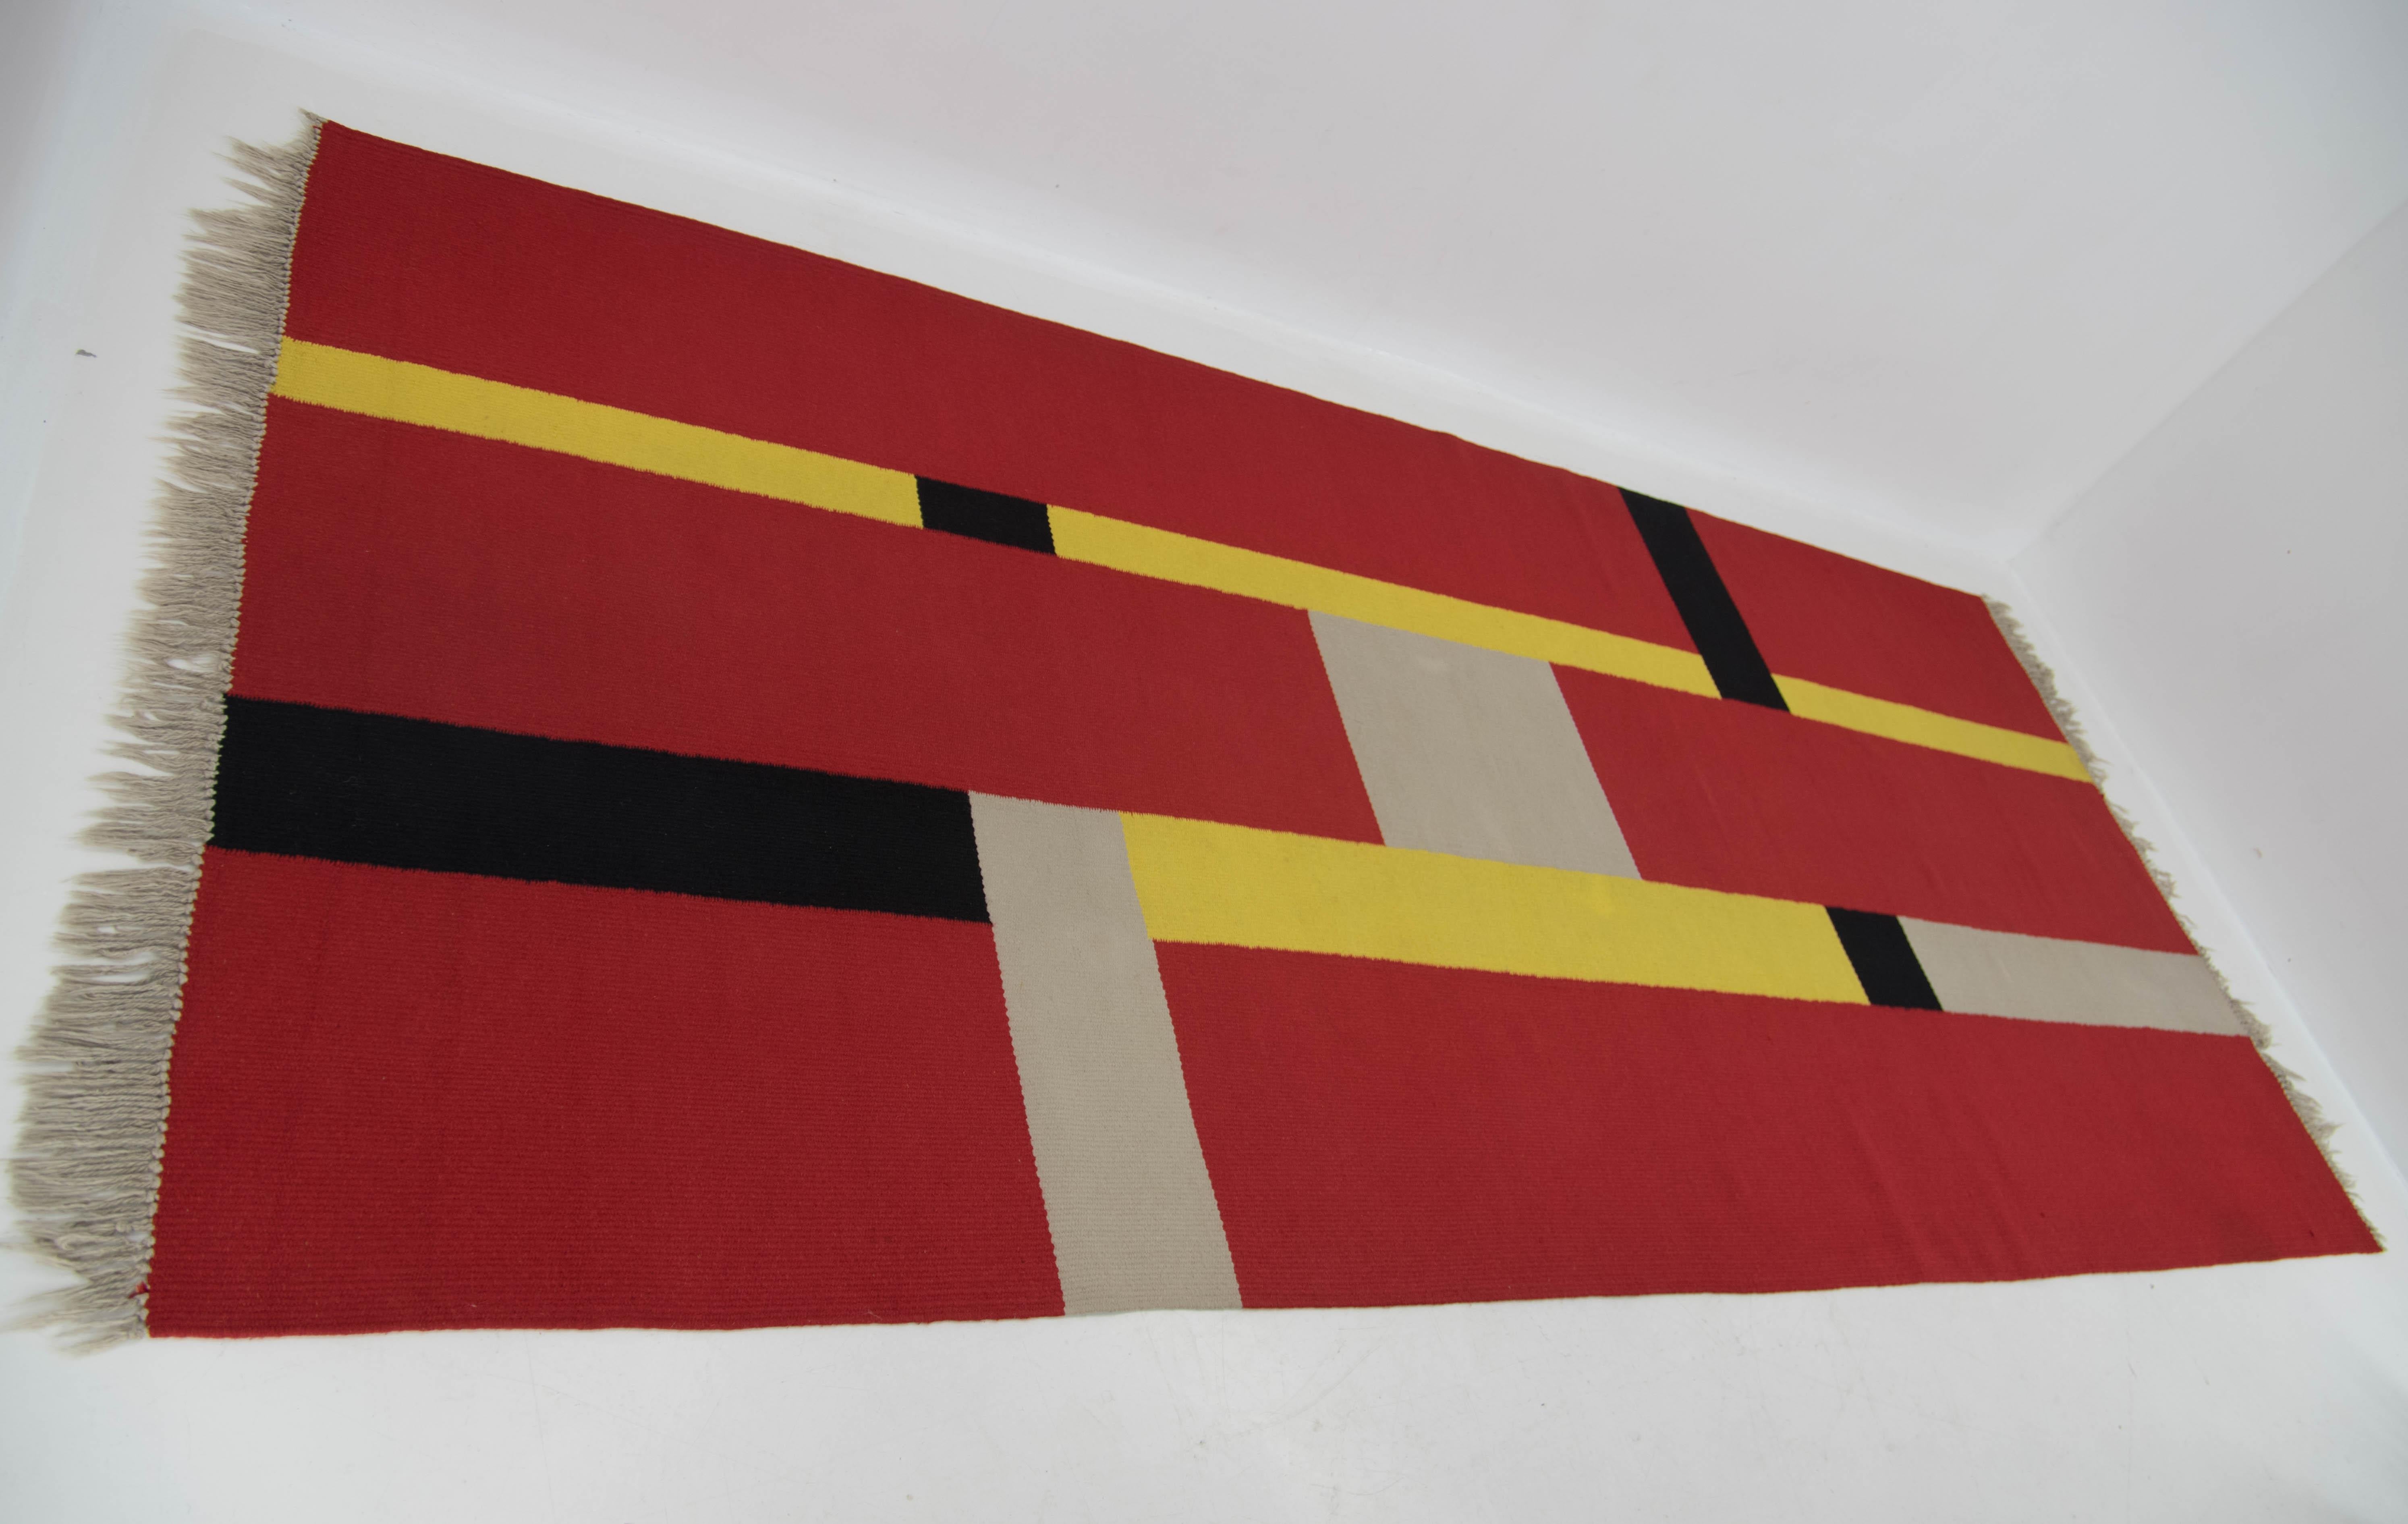 Large Bauhaus carpet with geometric pattern.
Made in Czechoslovakia in 1940s.
Very good original condition.